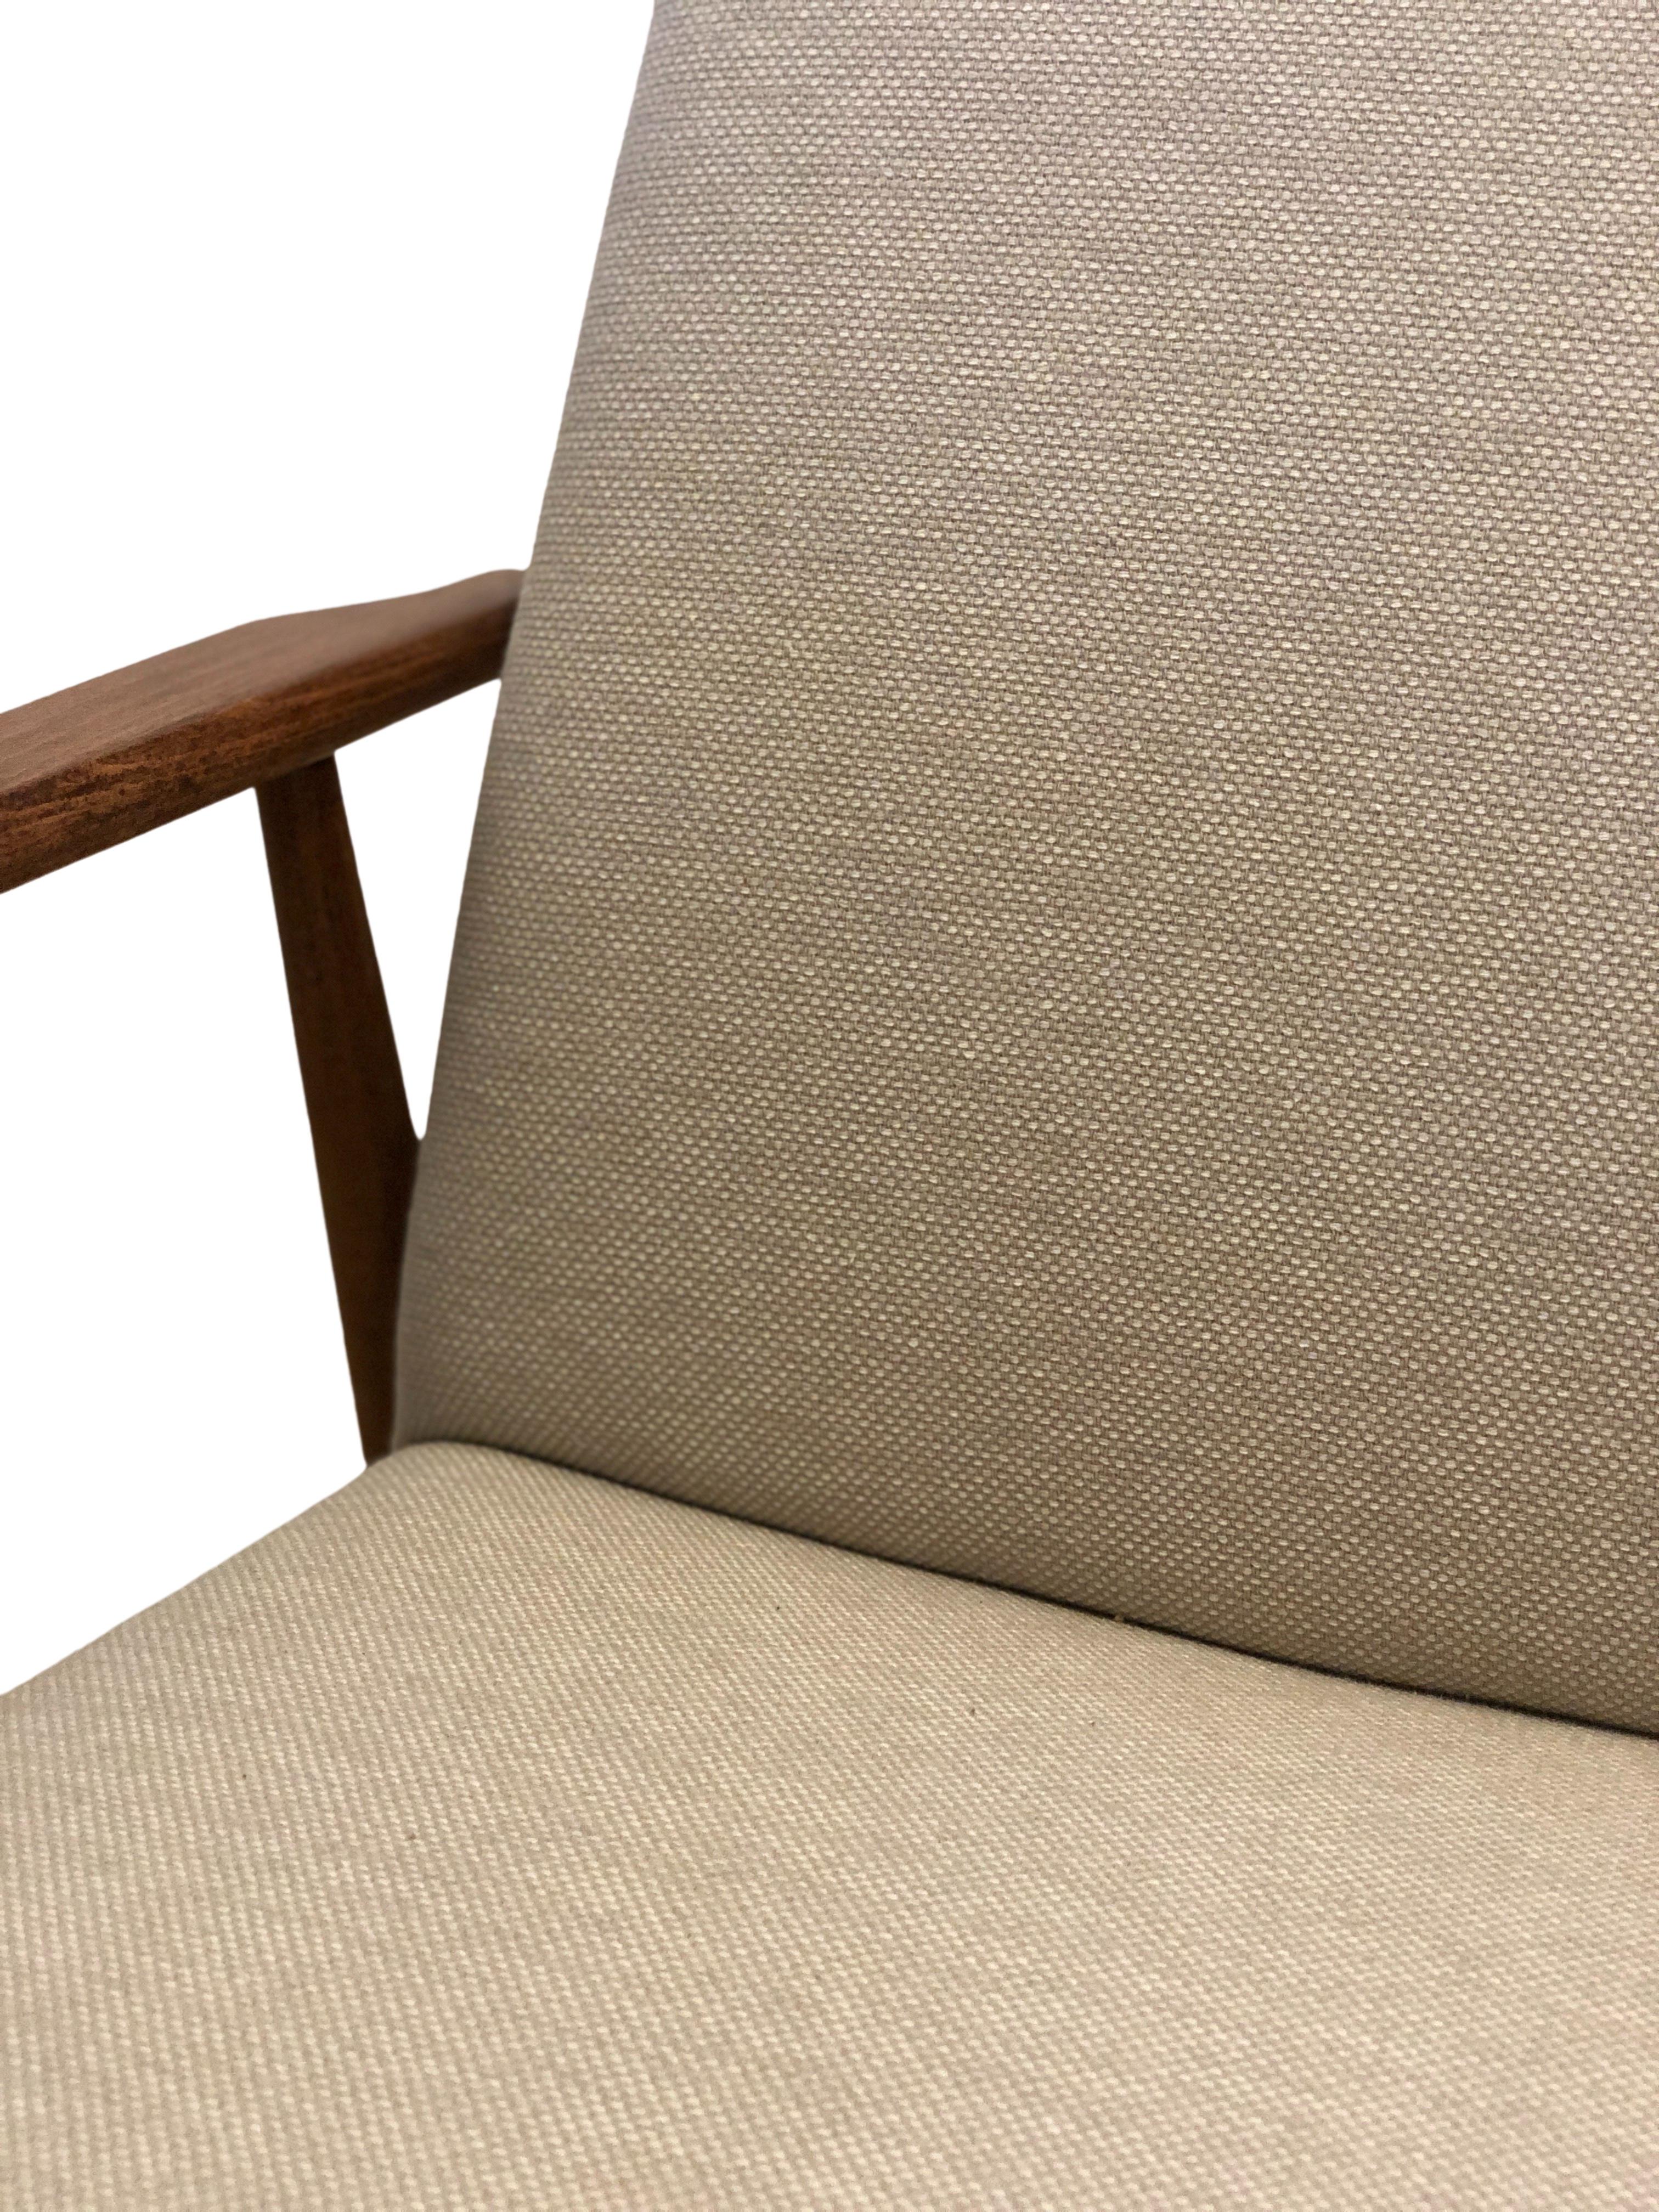 Midcentury Armchair by Henryk Lis in Beige Cotton Linen Upholstery, 1960s In Excellent Condition For Sale In WARSZAWA, 14